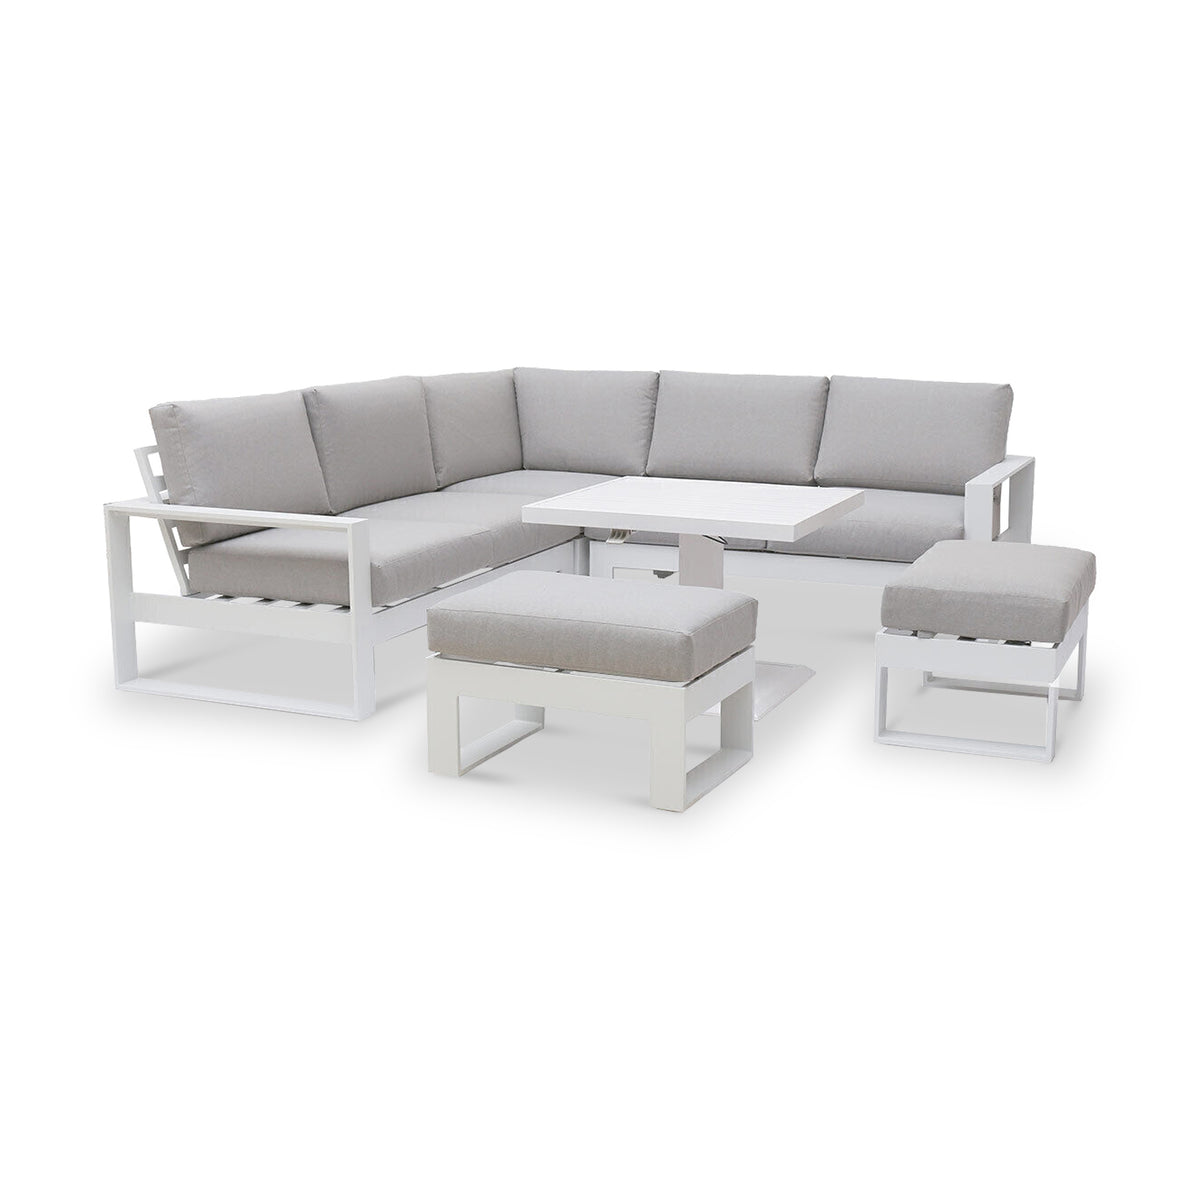 Amalfi White Small Corner Dining with Square Rising Table from Roseland Furniture